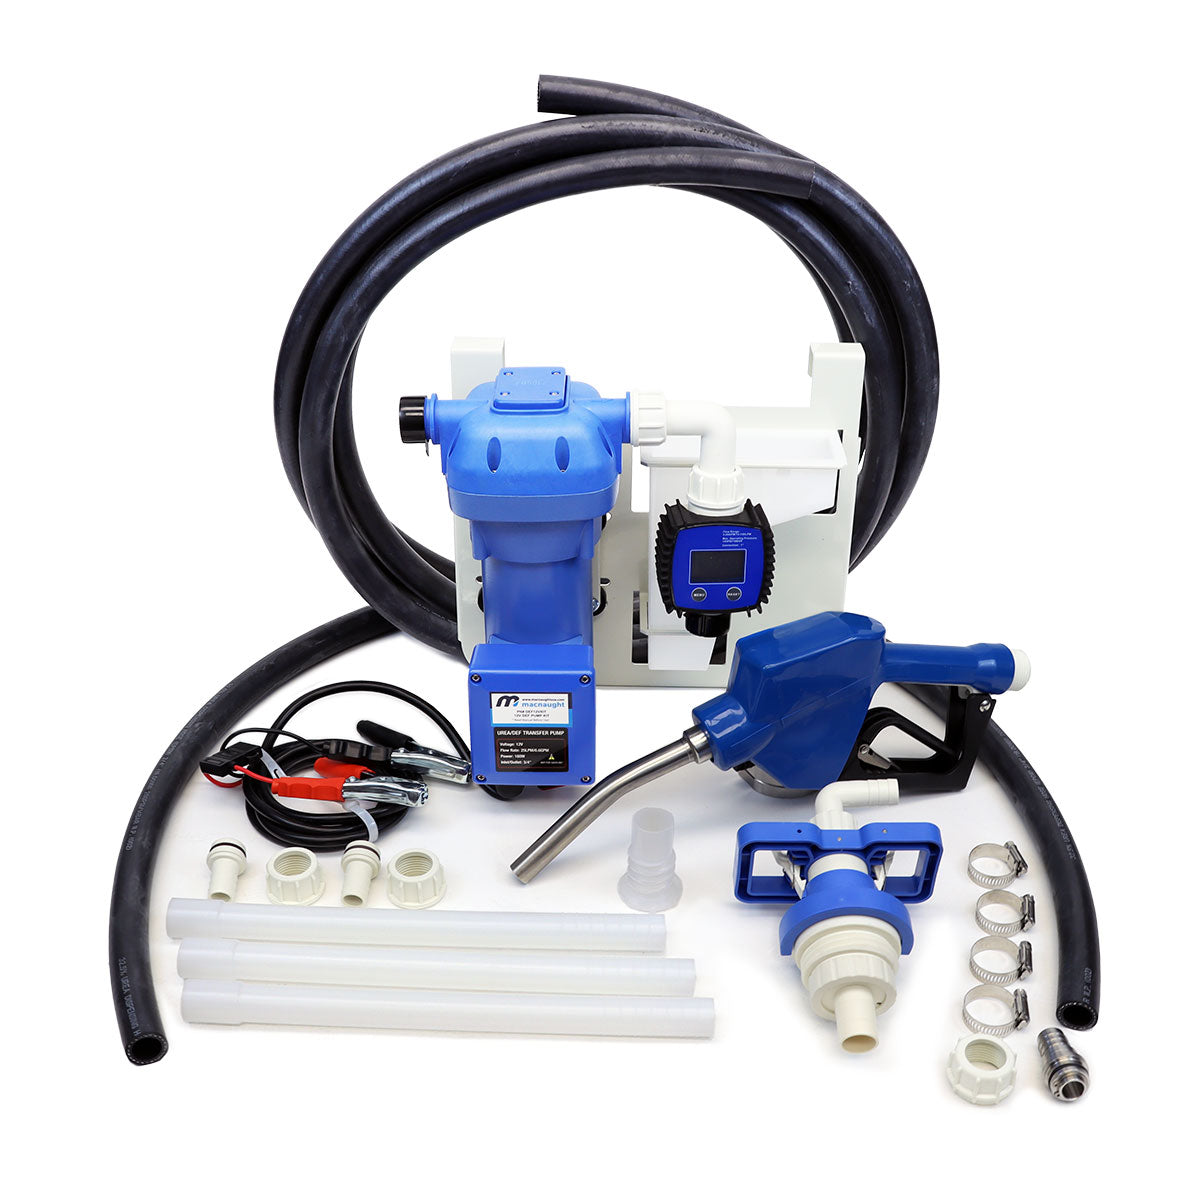 Macnaught M3 12V DEF Pump Kit- 6.6 GPM with Auto Nozzle and